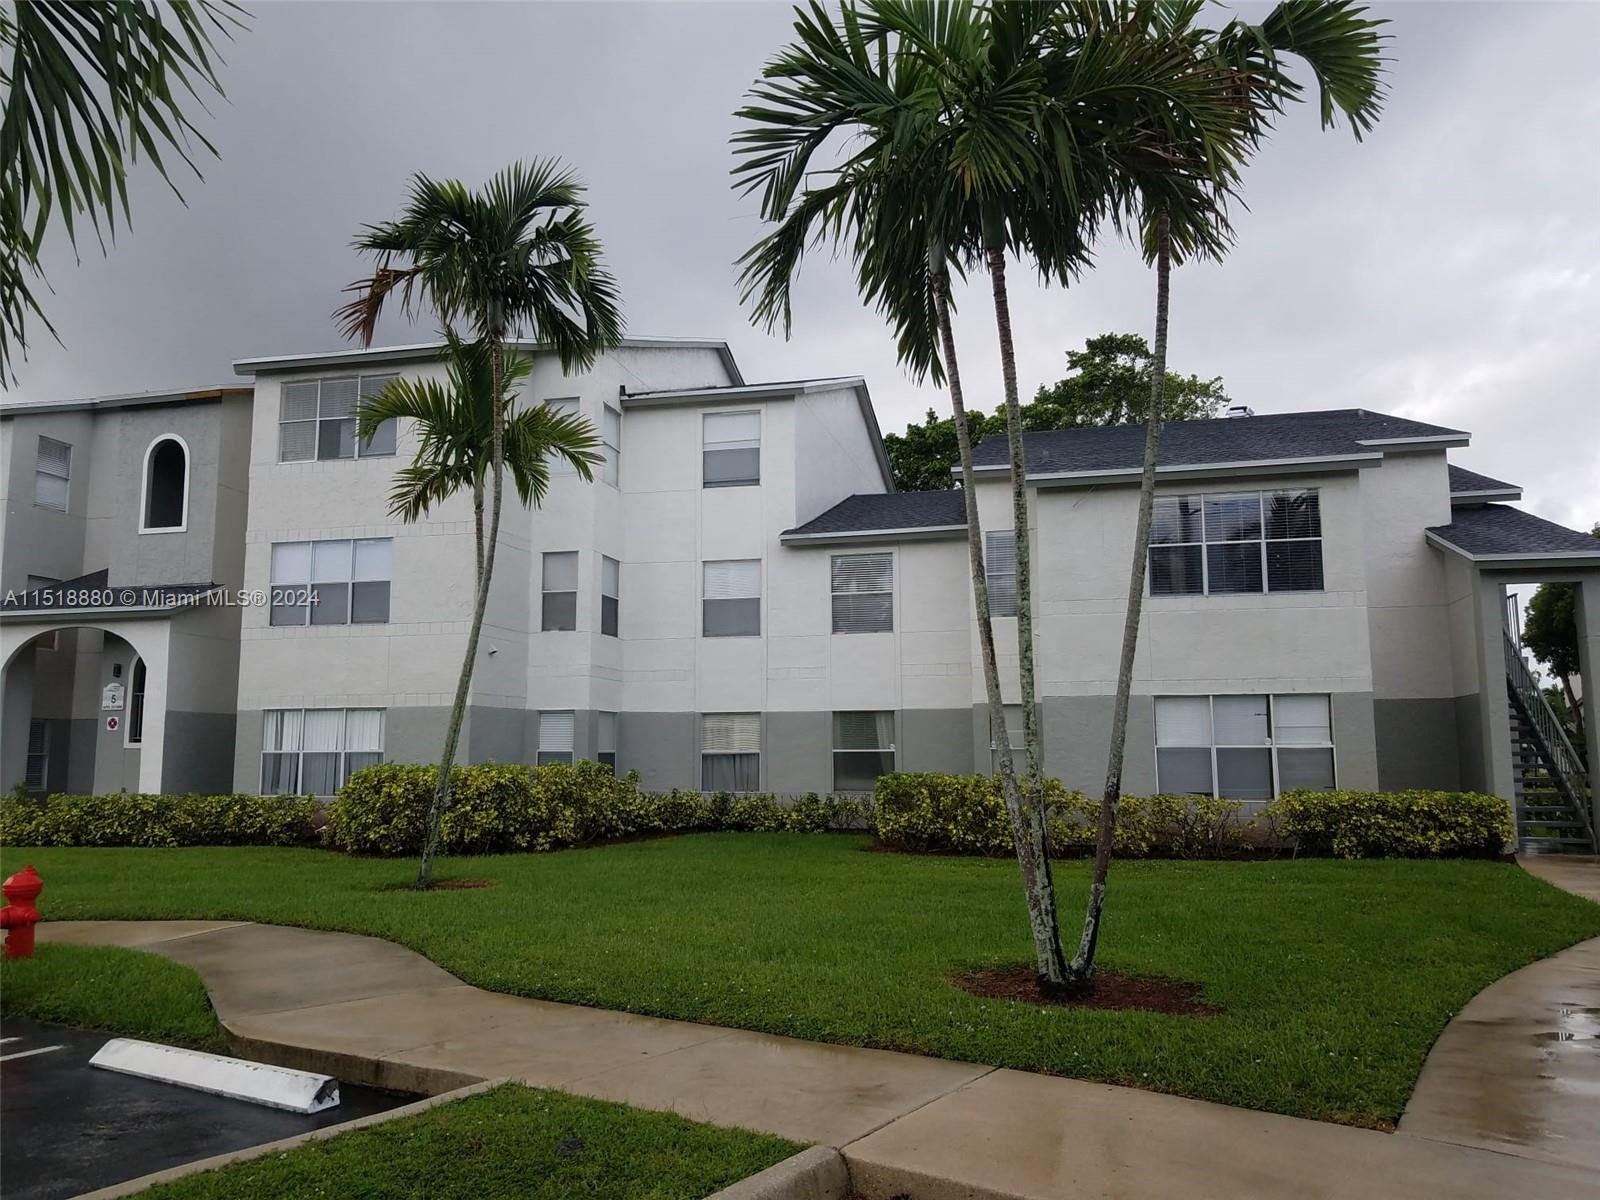 Rental Property at 1401 Village Blvd 527, West Palm Beach, Palm Beach County, Florida - Bedrooms: 2 
Bathrooms: 1  - $1,800 MO.